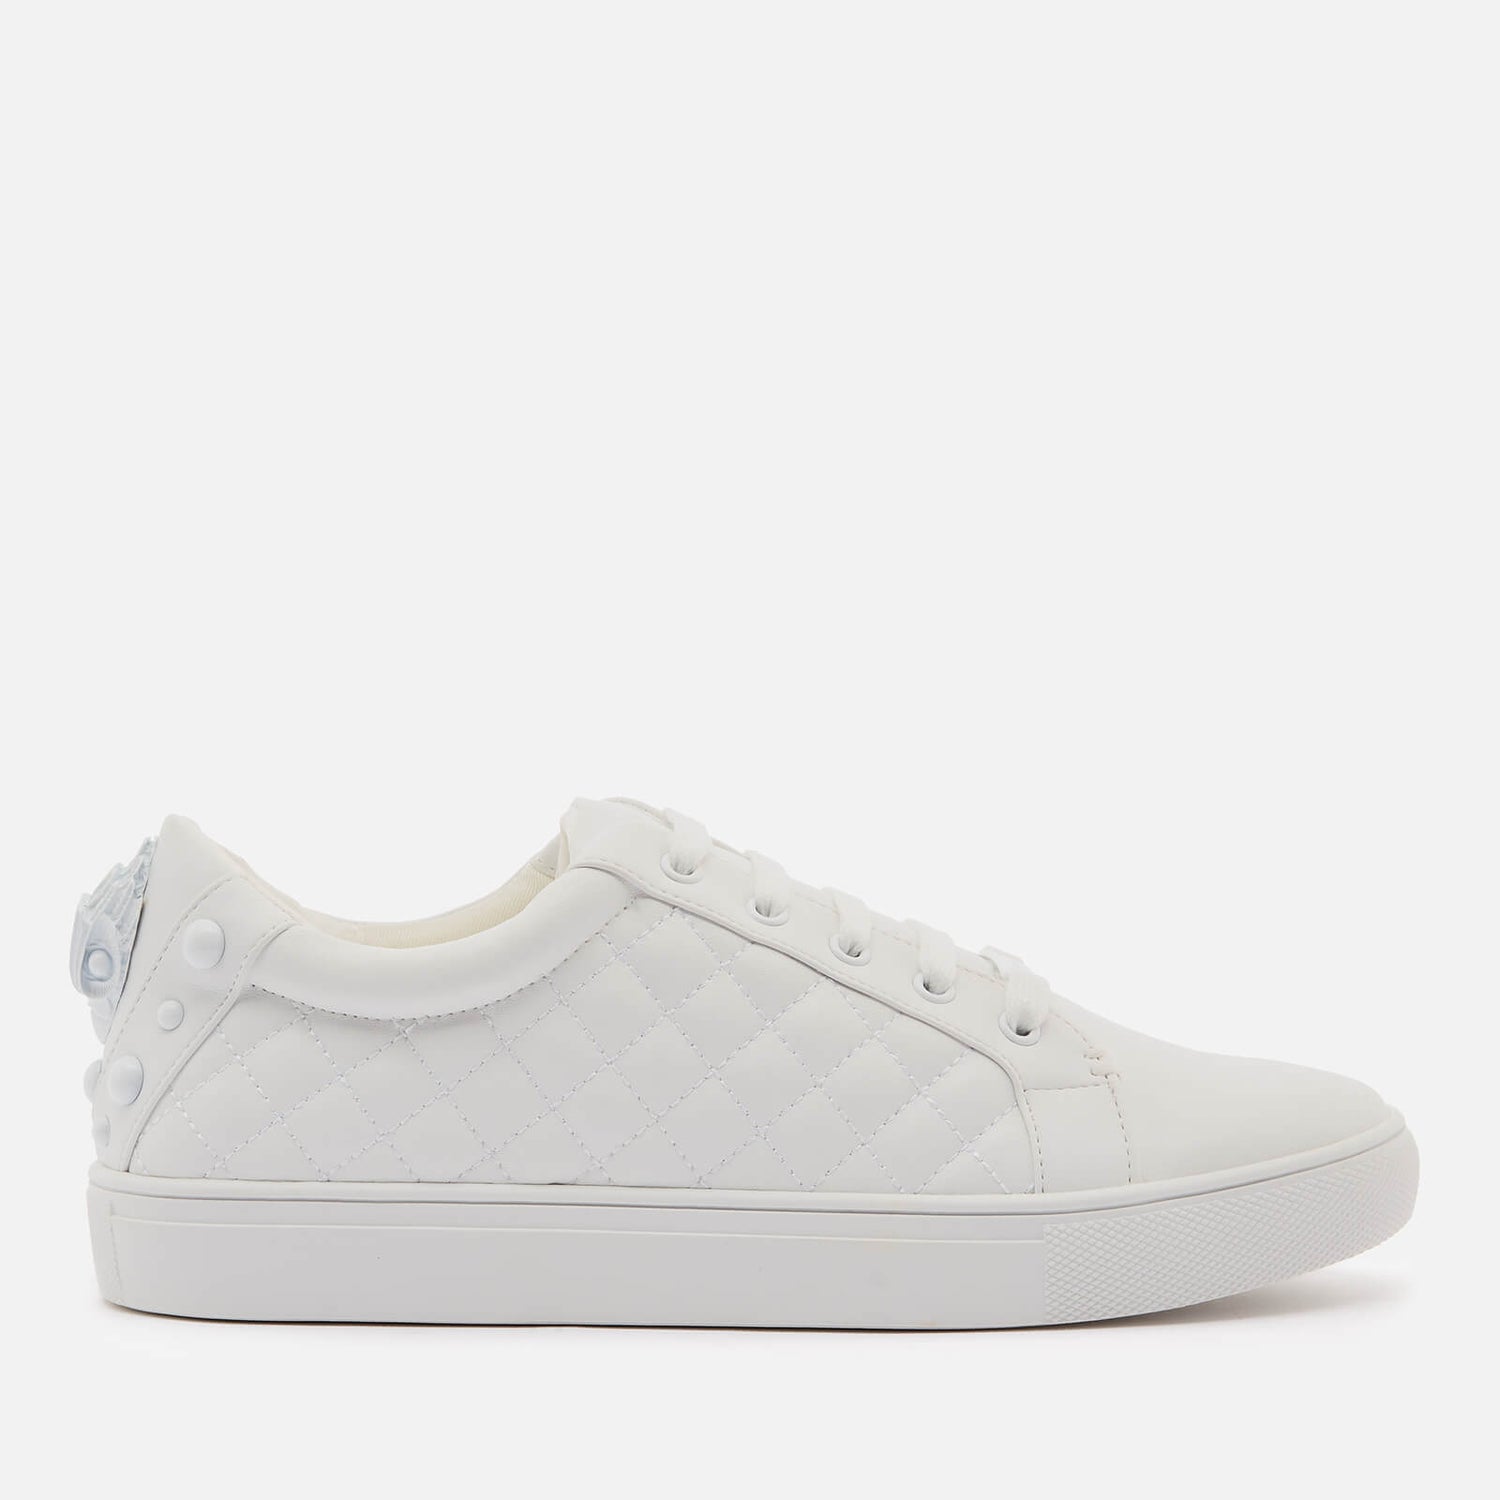 Kurt Geiger London Women's Ludo Drench Leather Quilted Cupsole Trainers - White